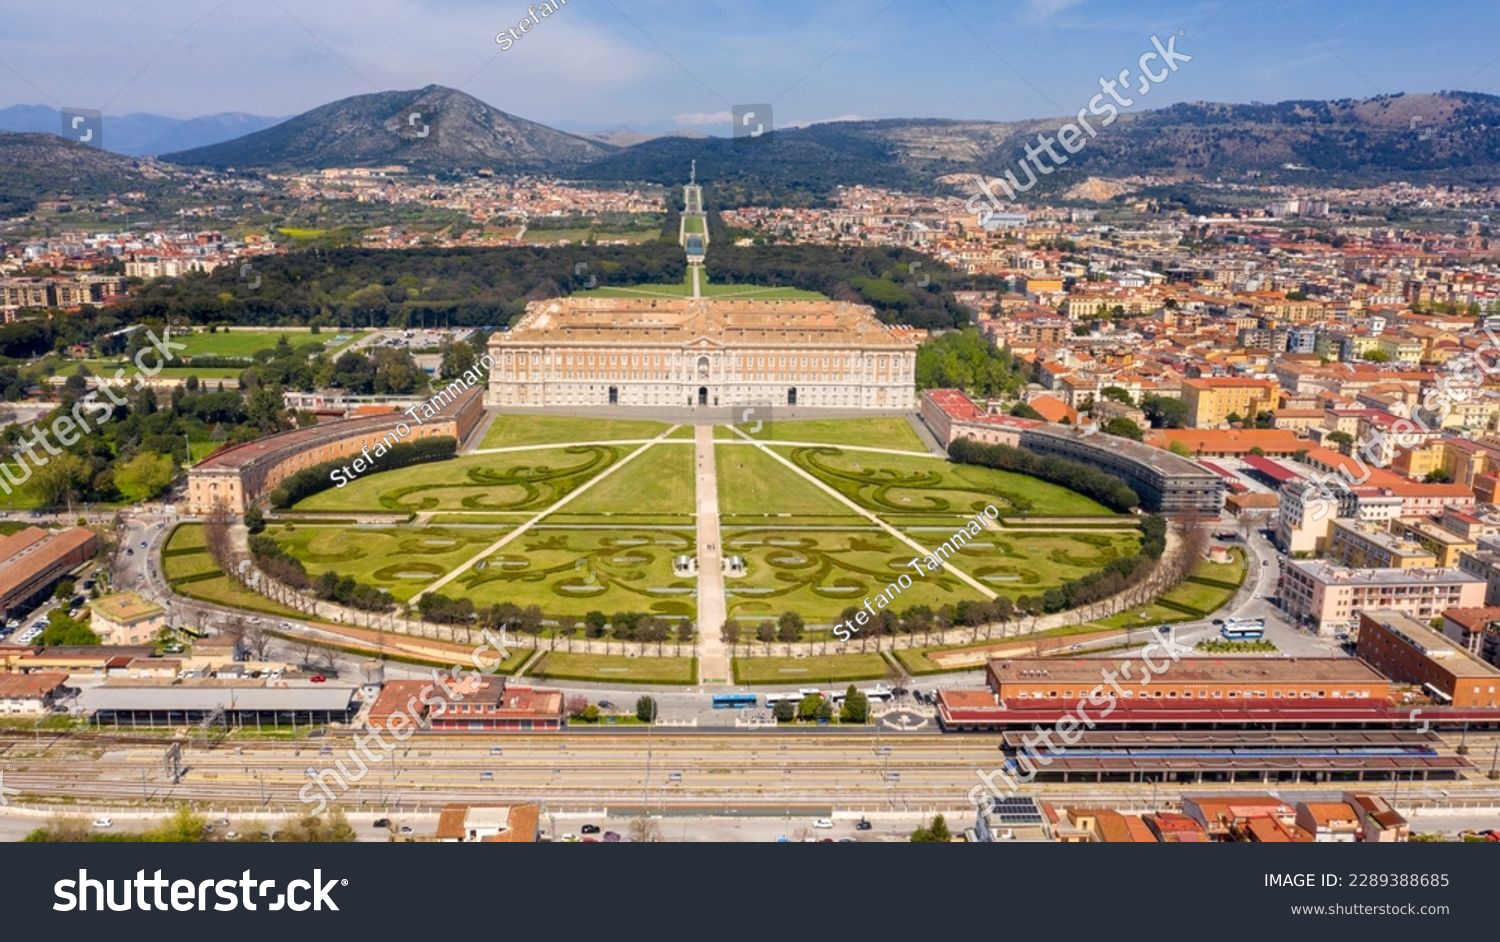 Aerial view of the Royal Palace of Caserta also known as Reggia di Caserta. It is a former royal residence with large gardens in Caserta, near Naples, Italy. It is the main facade of the building. #2289388685